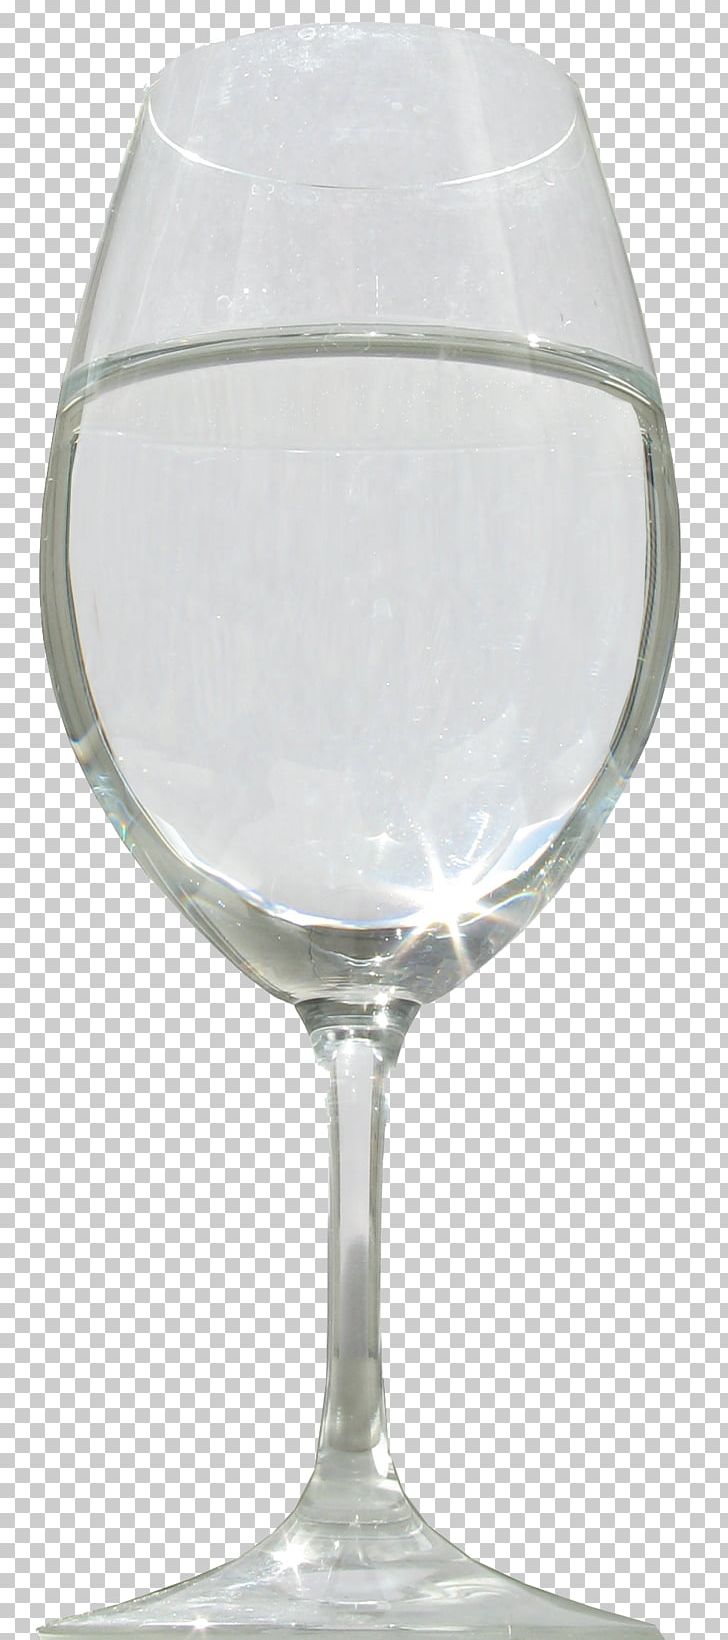 Wine Glass Snifter Champagne Glass Highball Glass Beer Glasses PNG, Clipart, Bacteria, Beer Glass, Champagne, Champagne Stemware, Clothing Free PNG Download